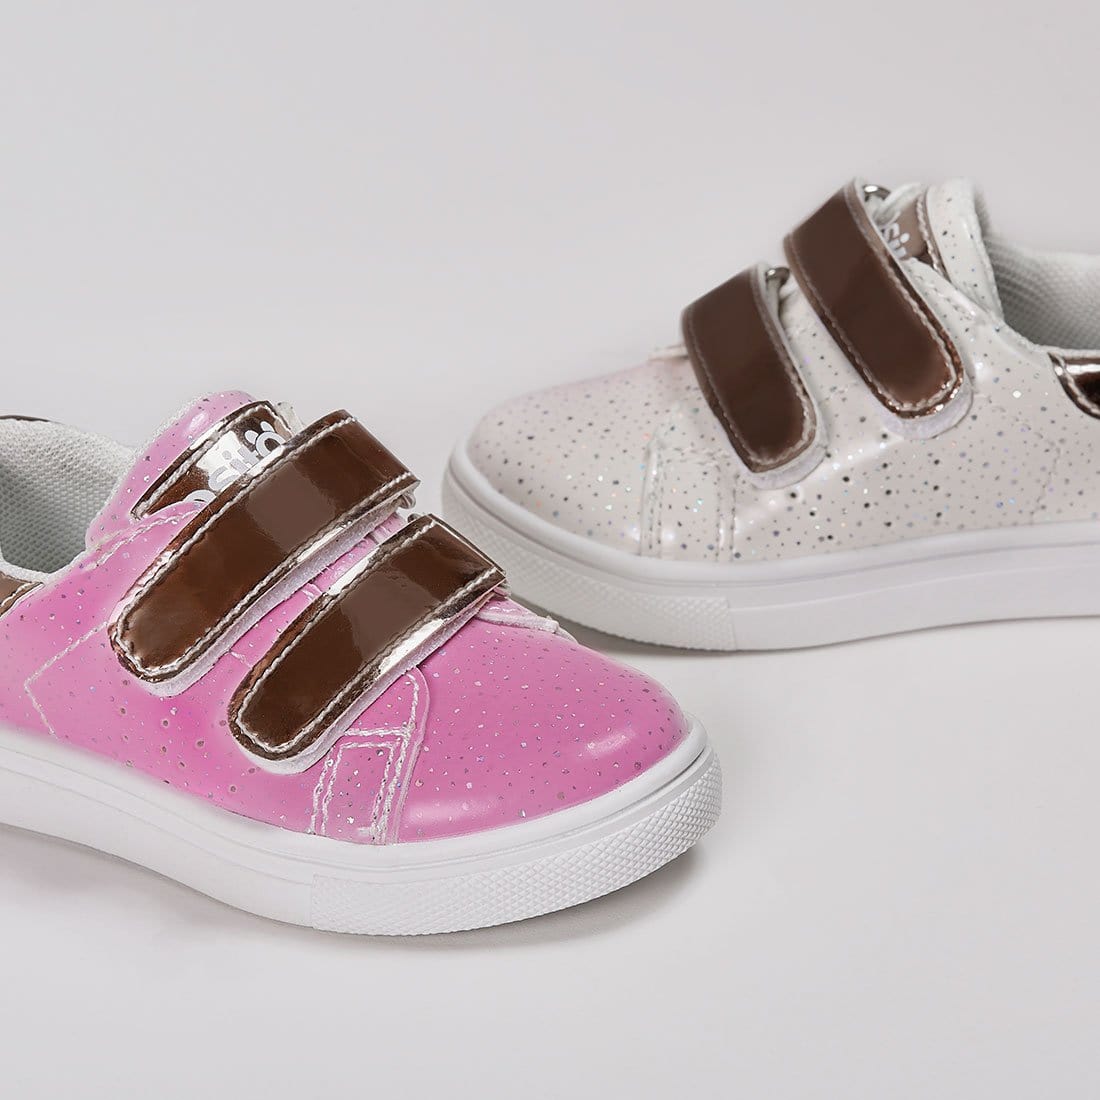 OSITO Shoes Baby's Colour-Changing Sneakers